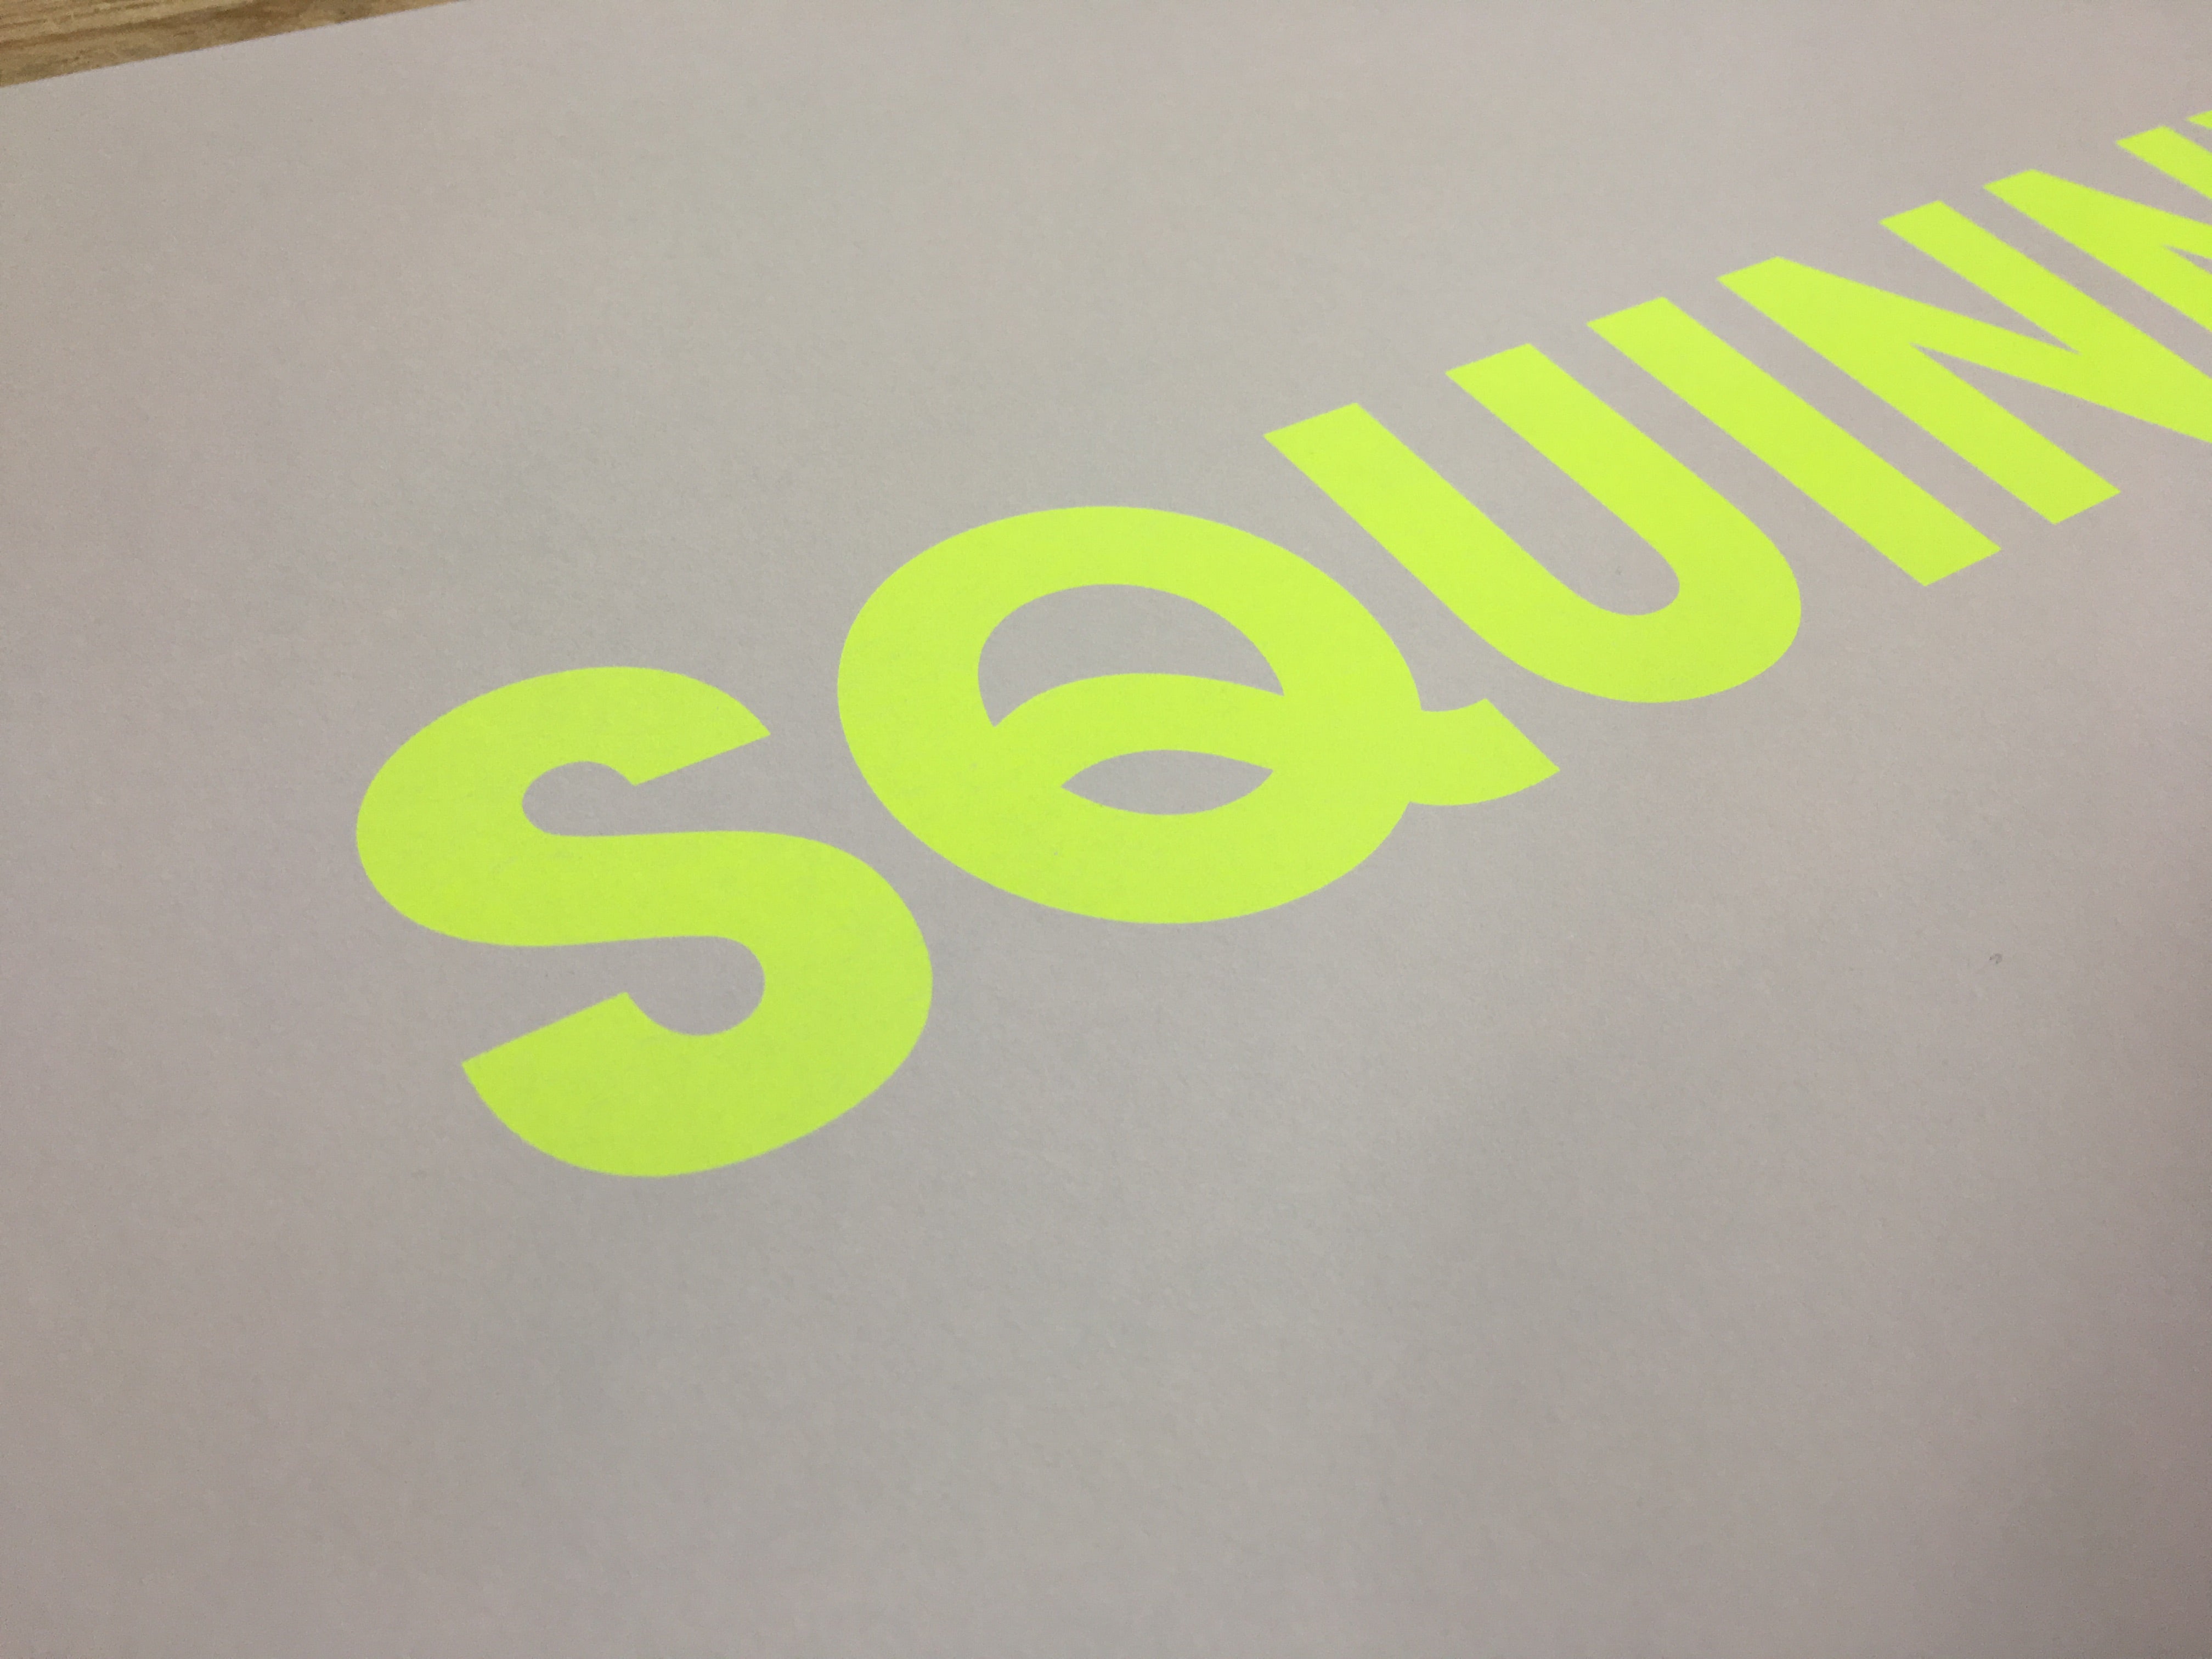 A3 SQUINNY RISO PRINT - POMPEY TYPE SERIES - foursandeights